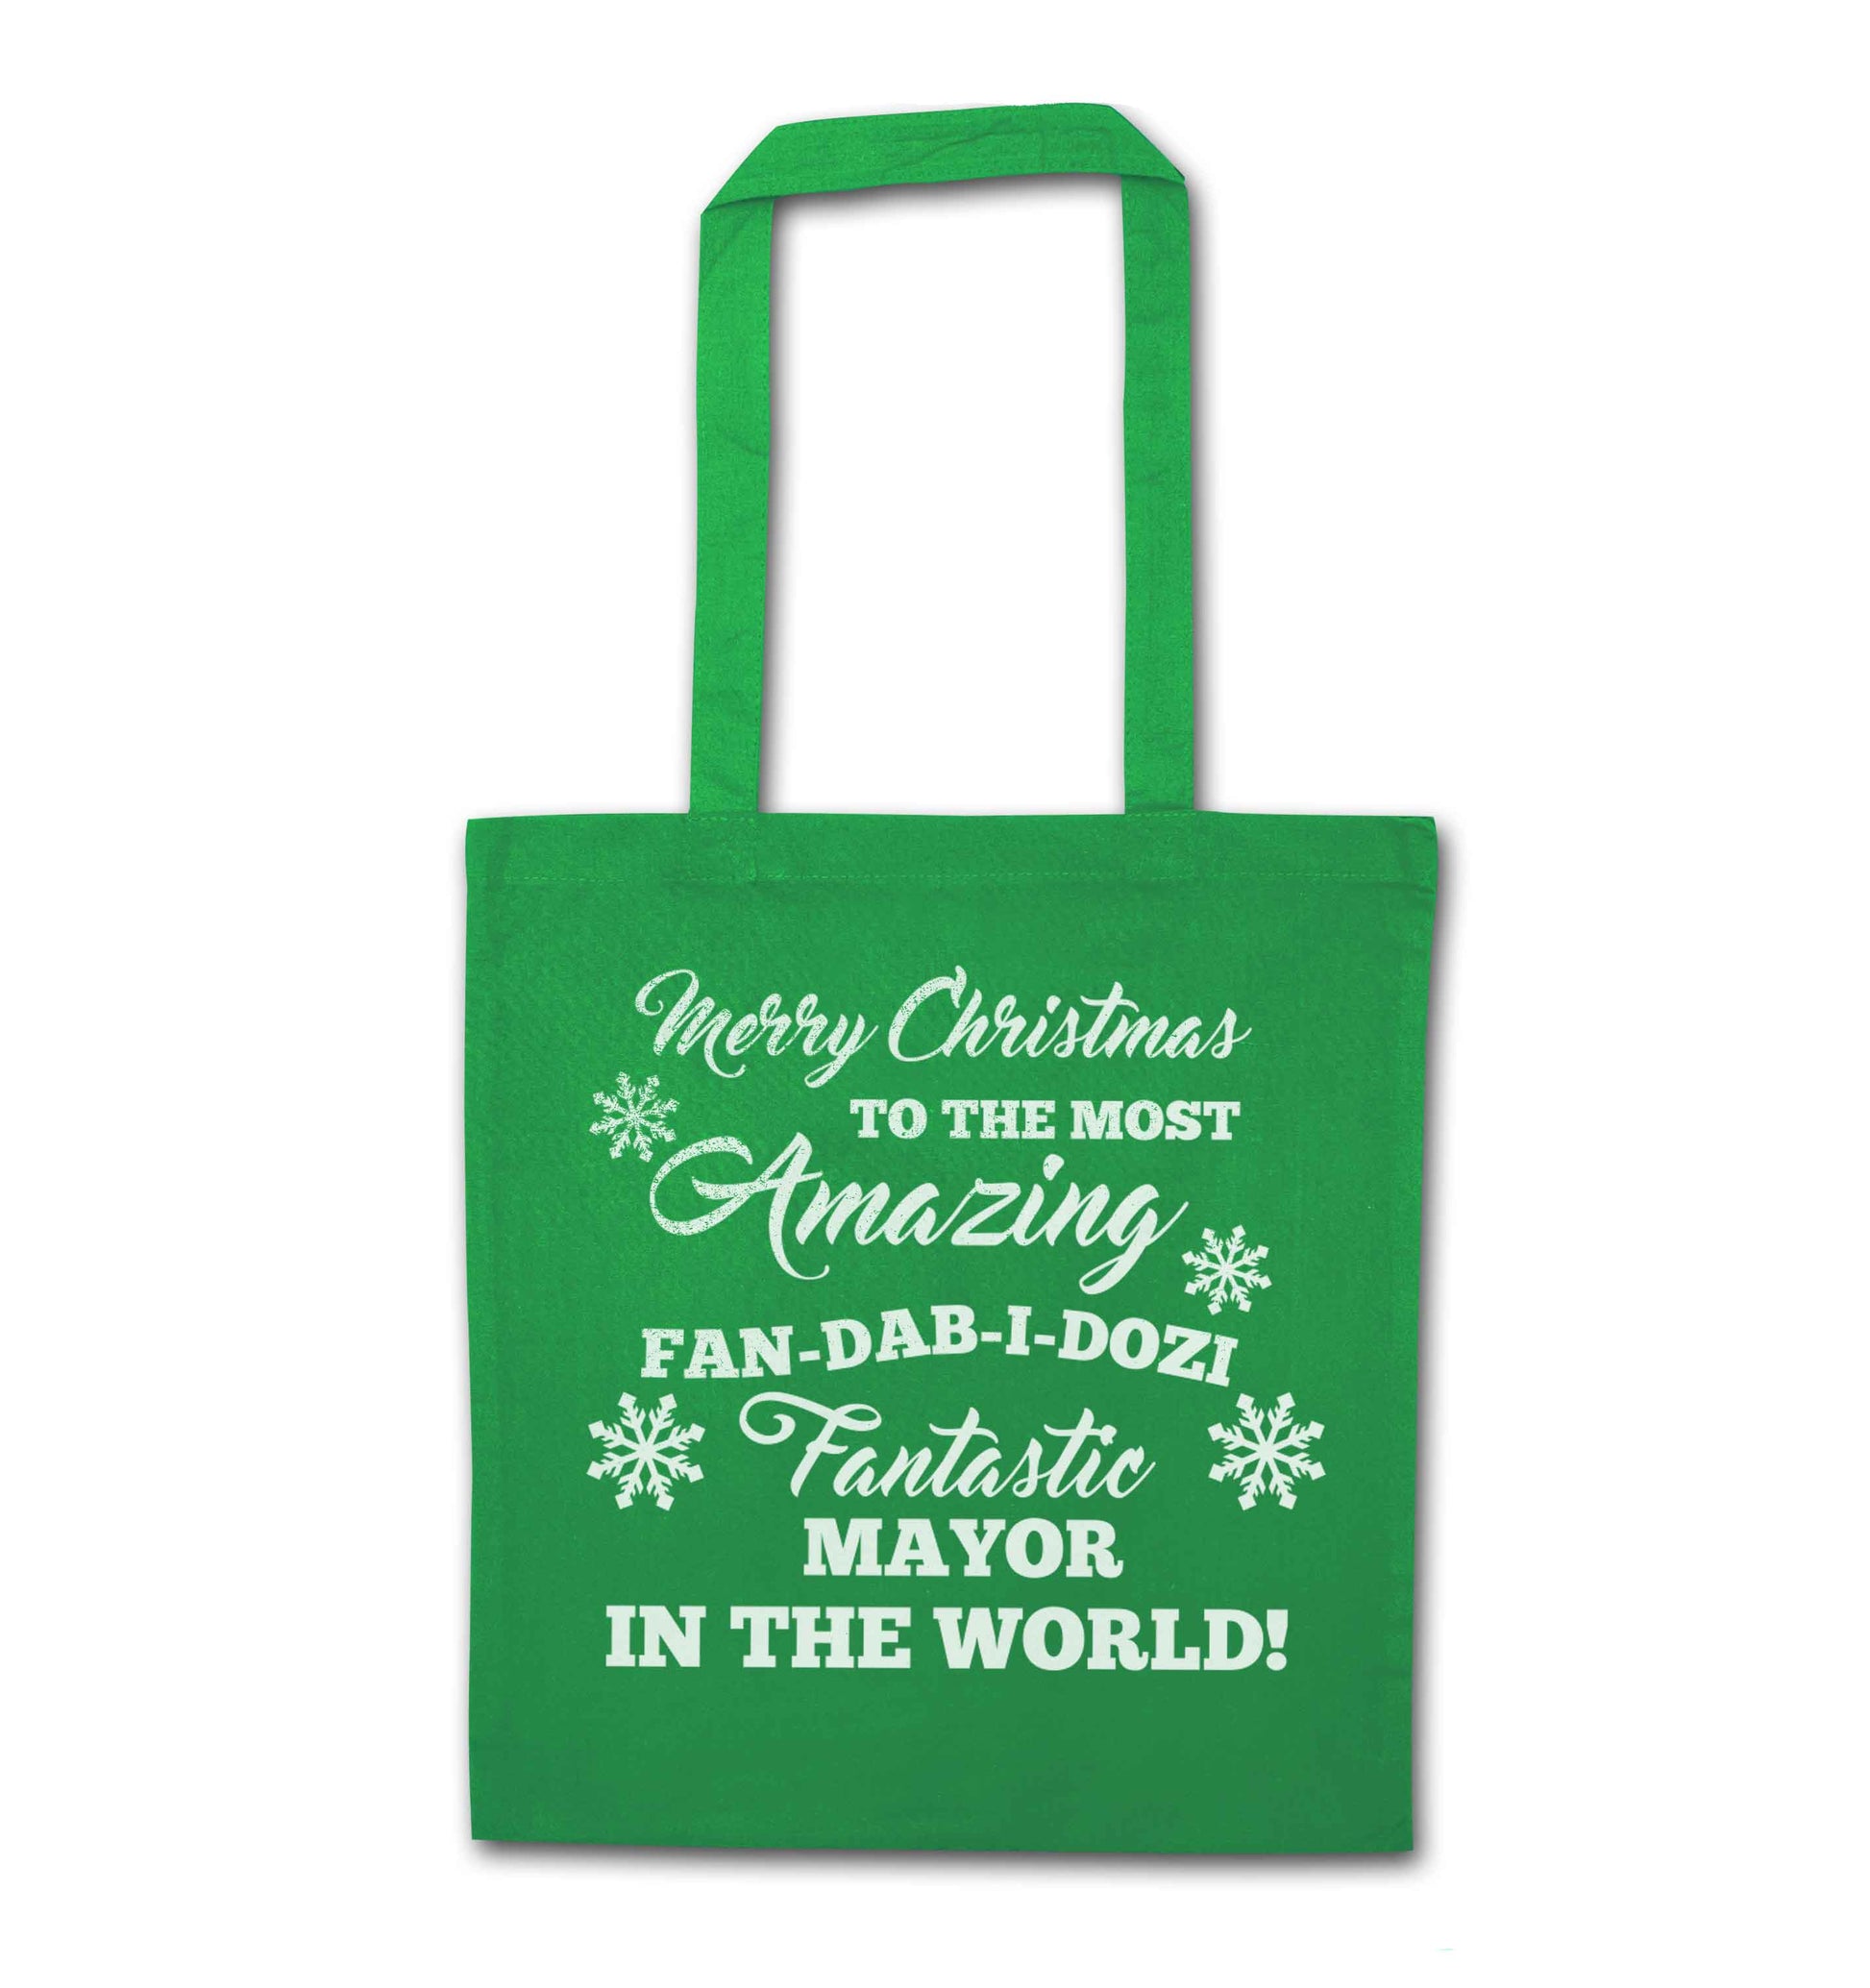 Merry Christmas to the most amazing fireman in the world! green tote bag